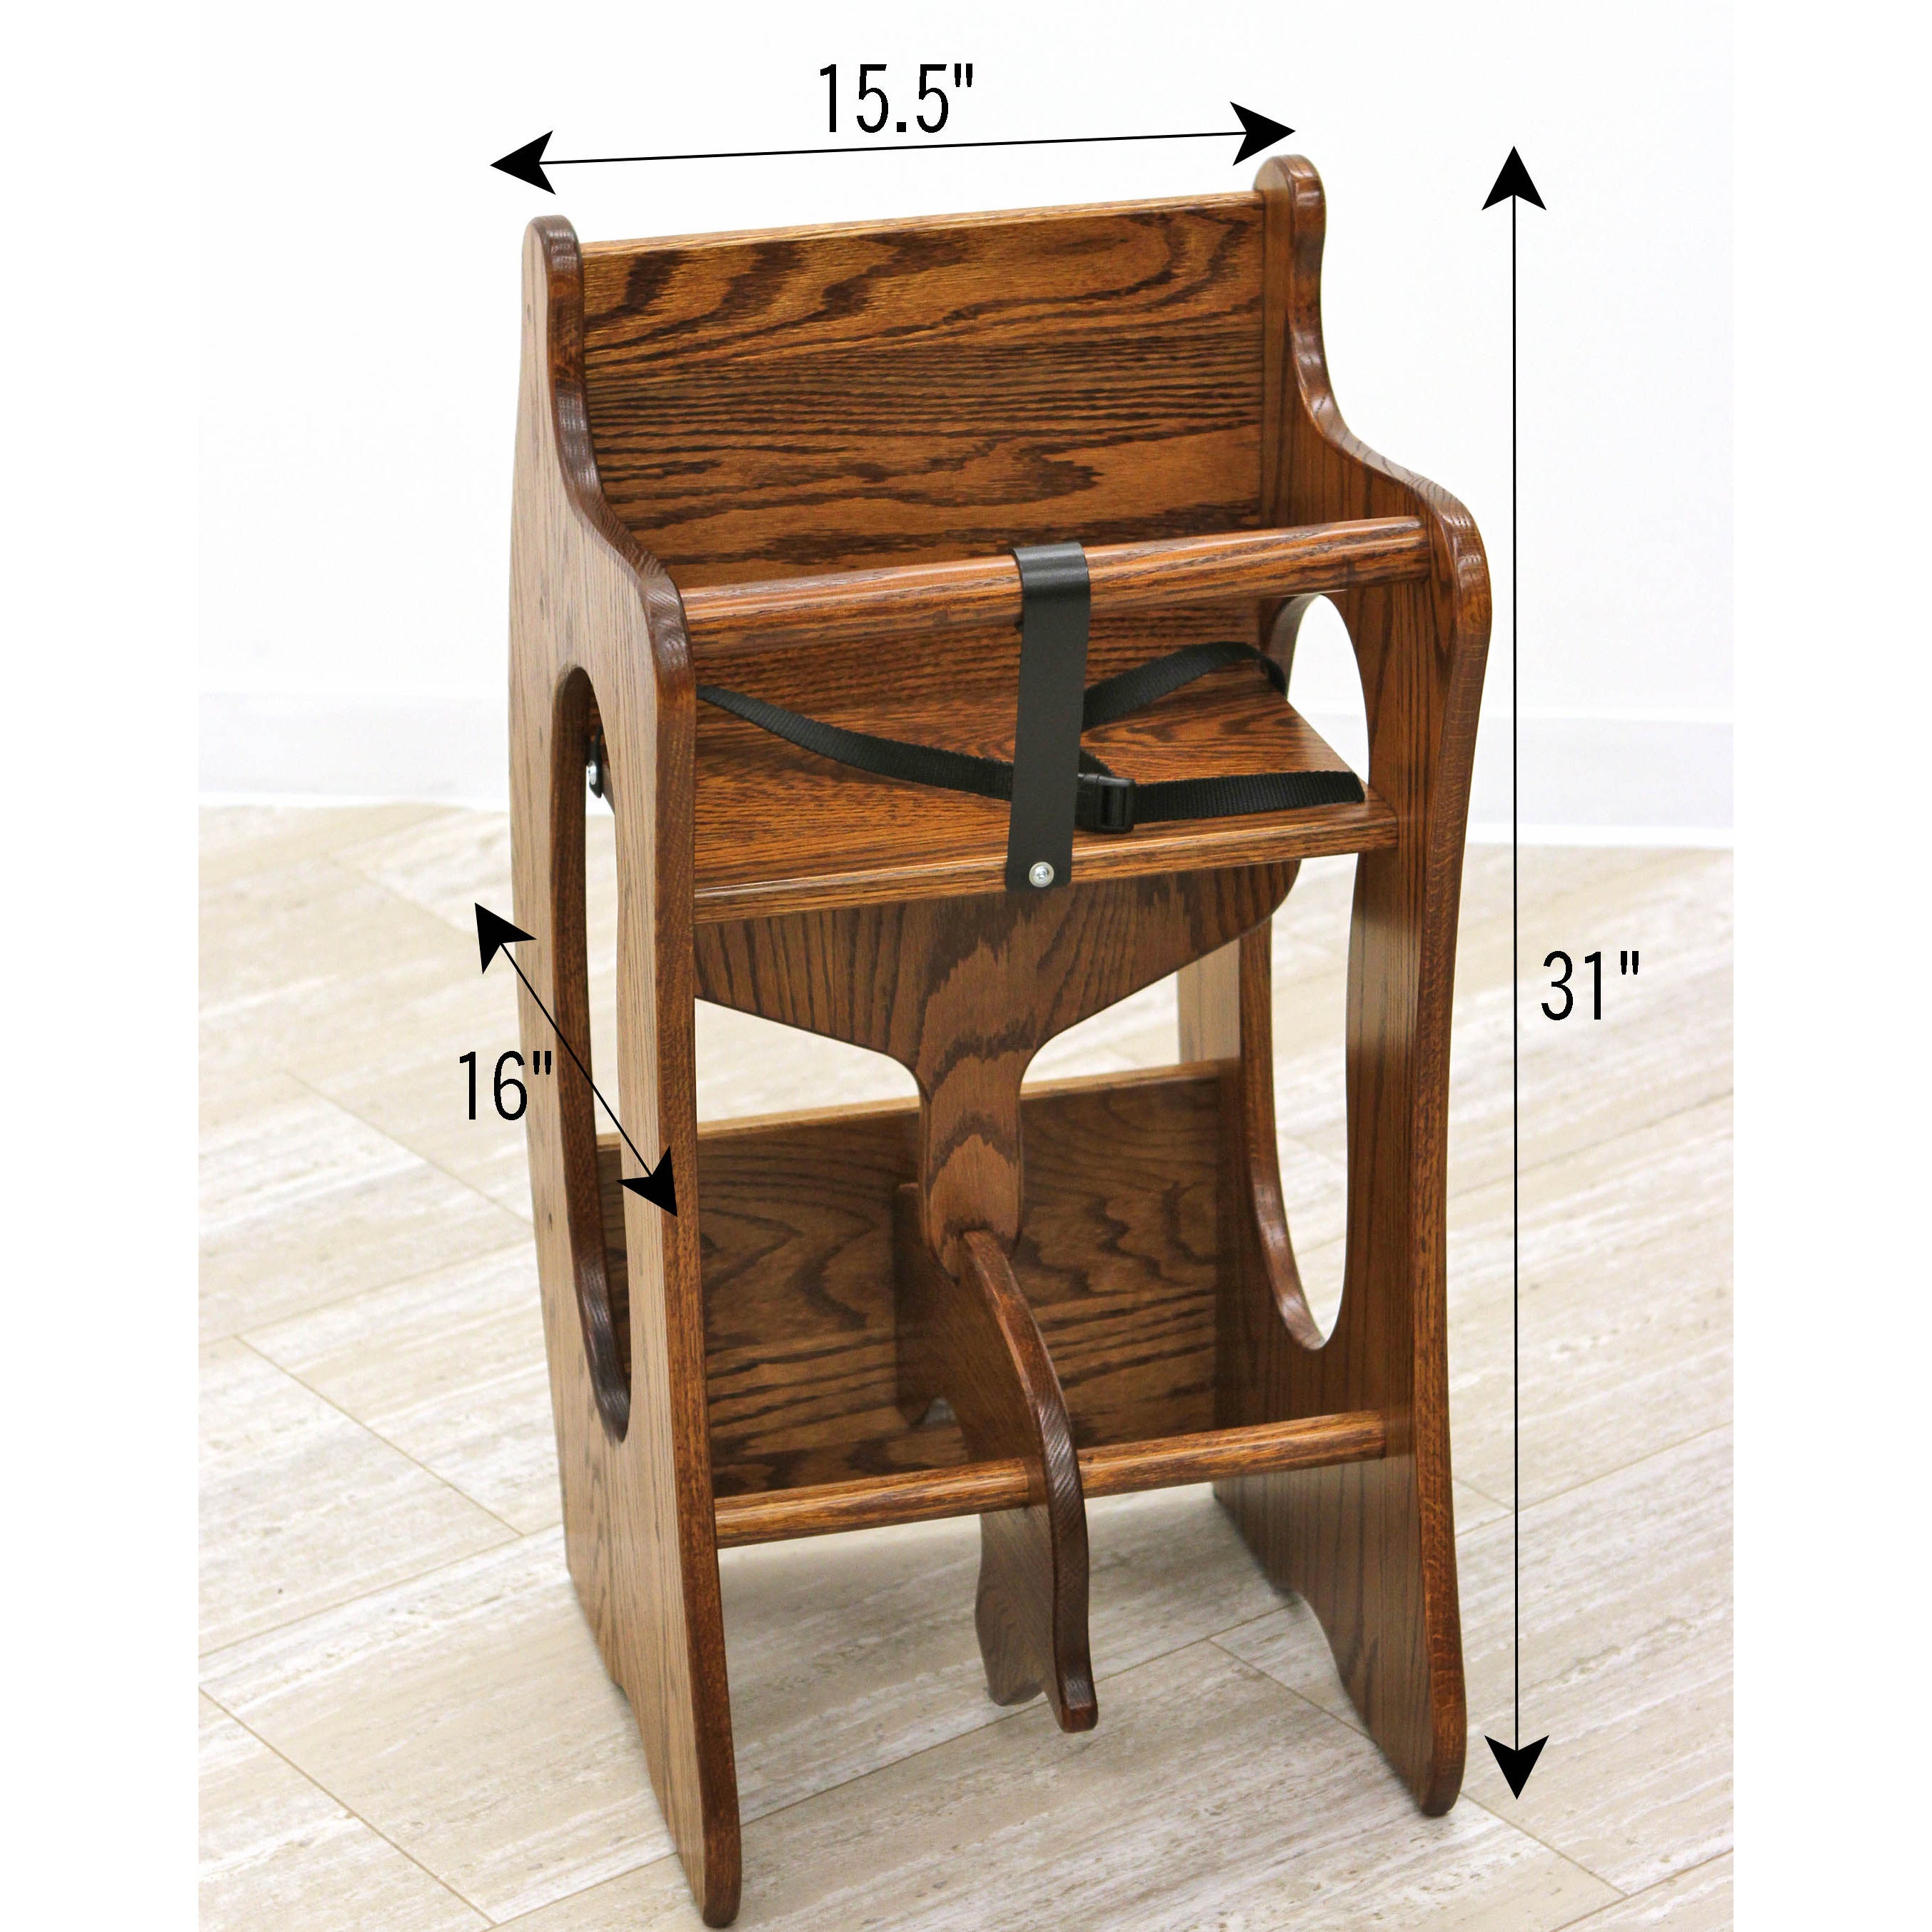 3-in-1 Chair